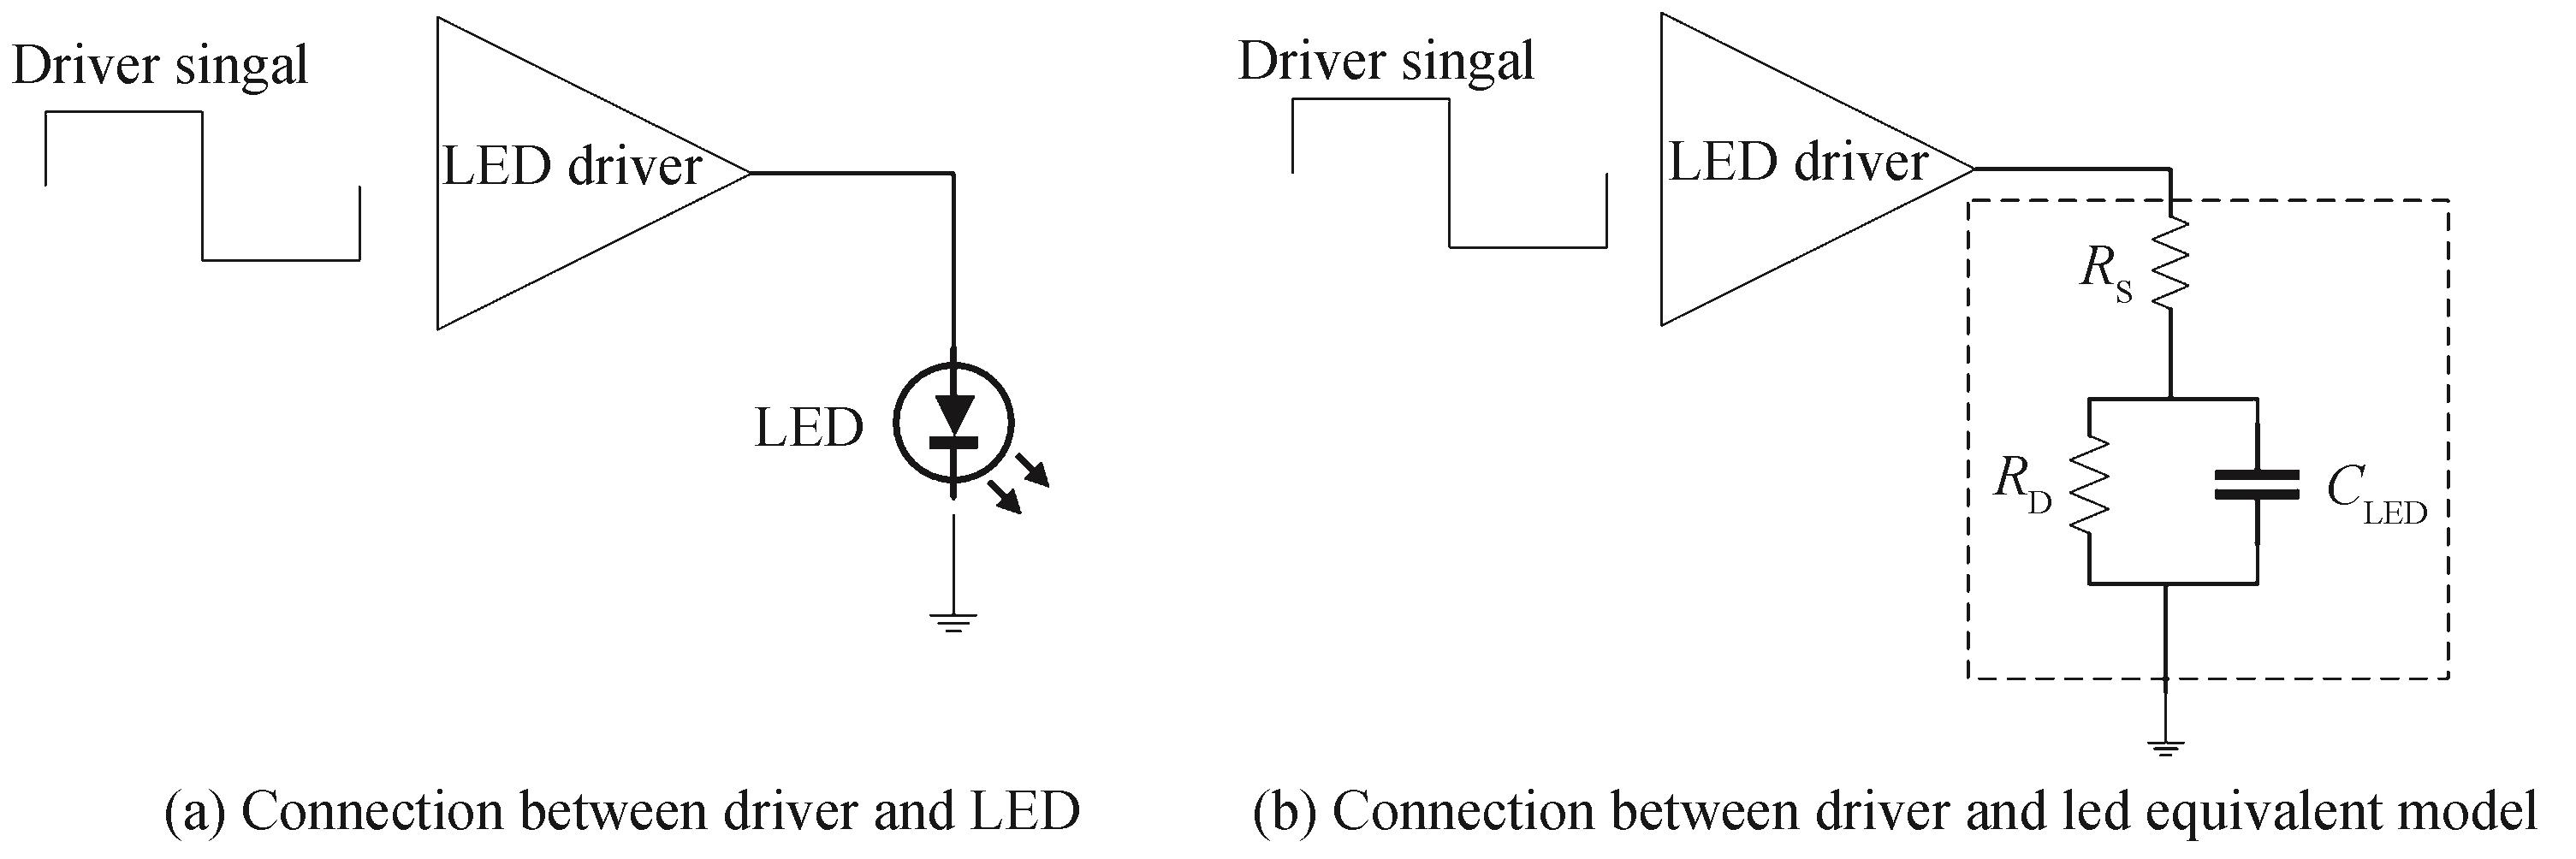 Connection diagram of LED drive circuit and LED